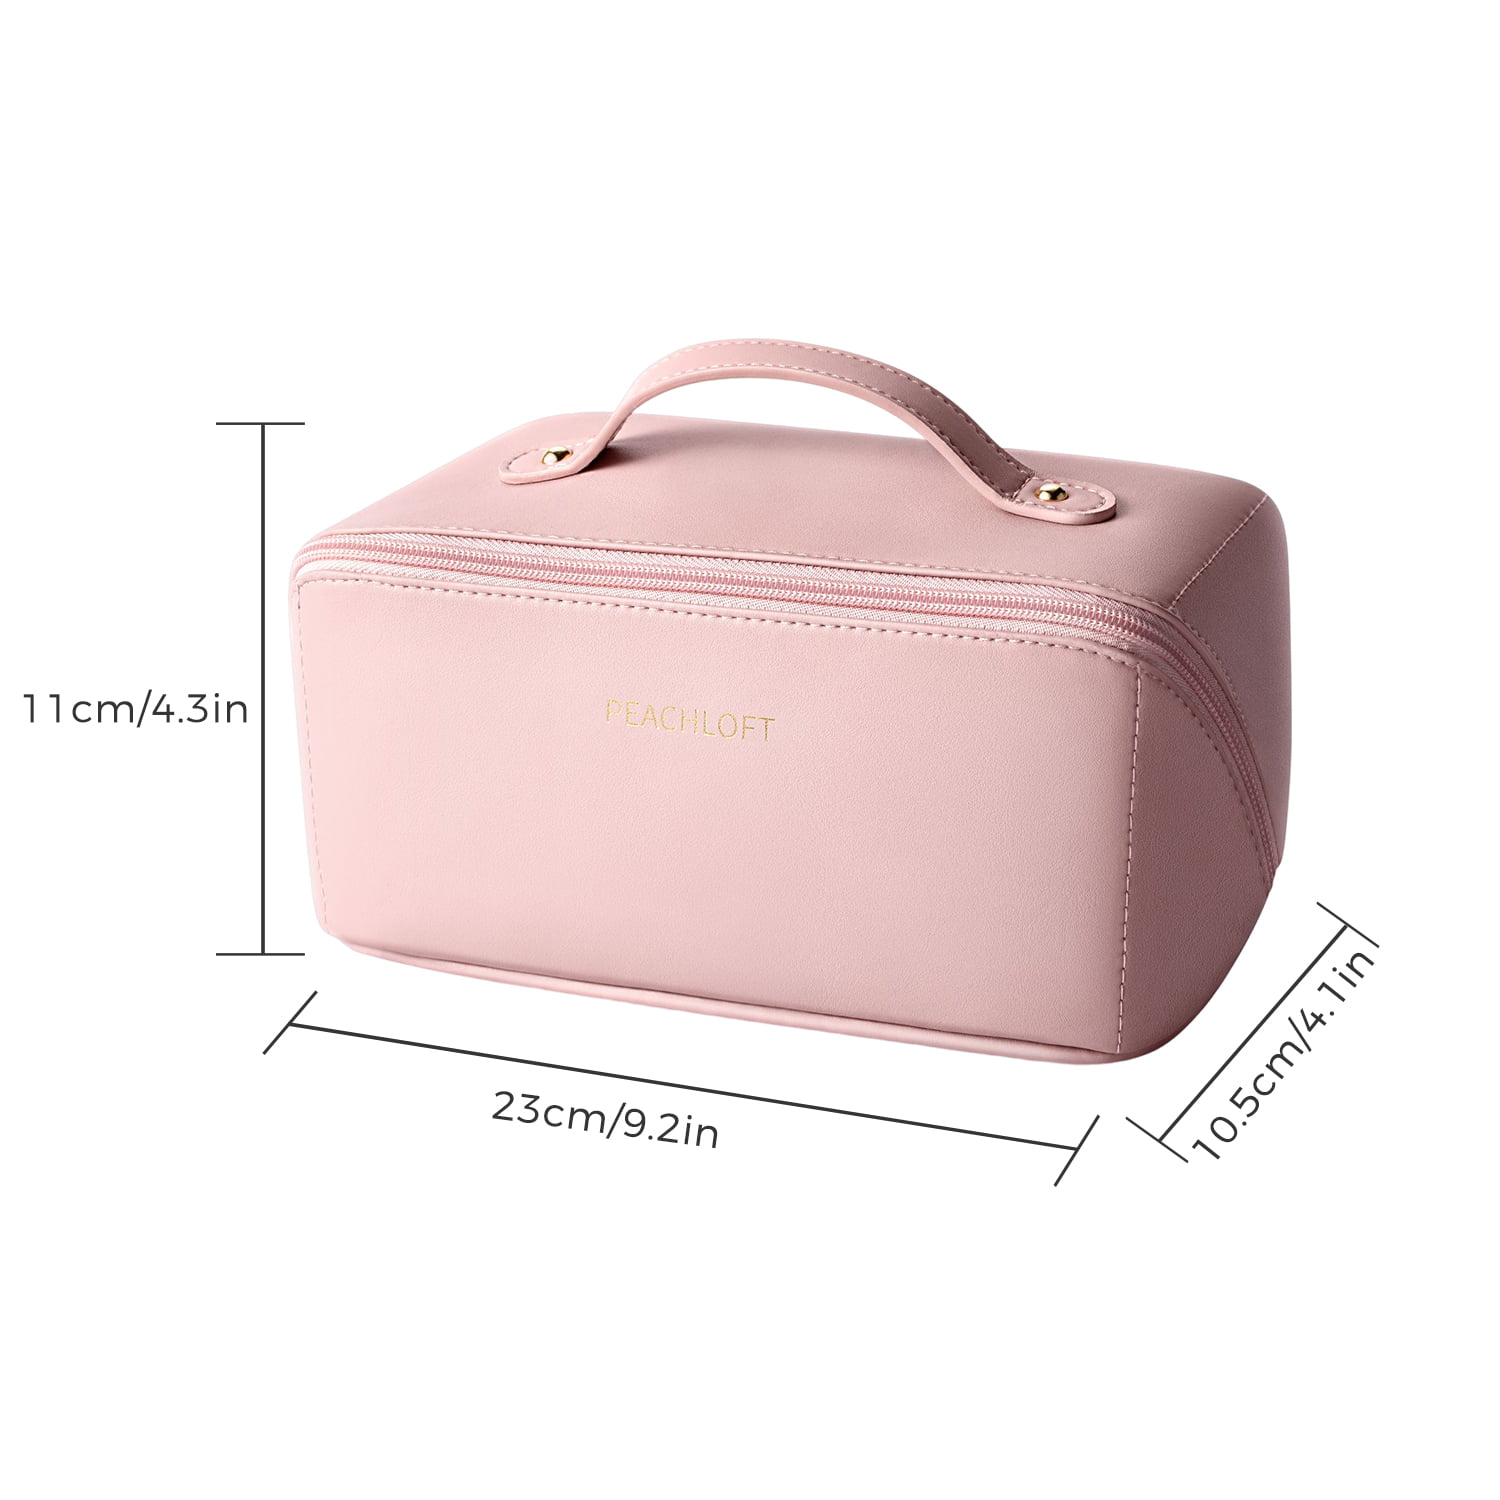 Benevolence La Toiletry Bag for Women Travel and Cosmetics - Large, Dusty Pink, Size: 8.3 x 5.9 x 3.15